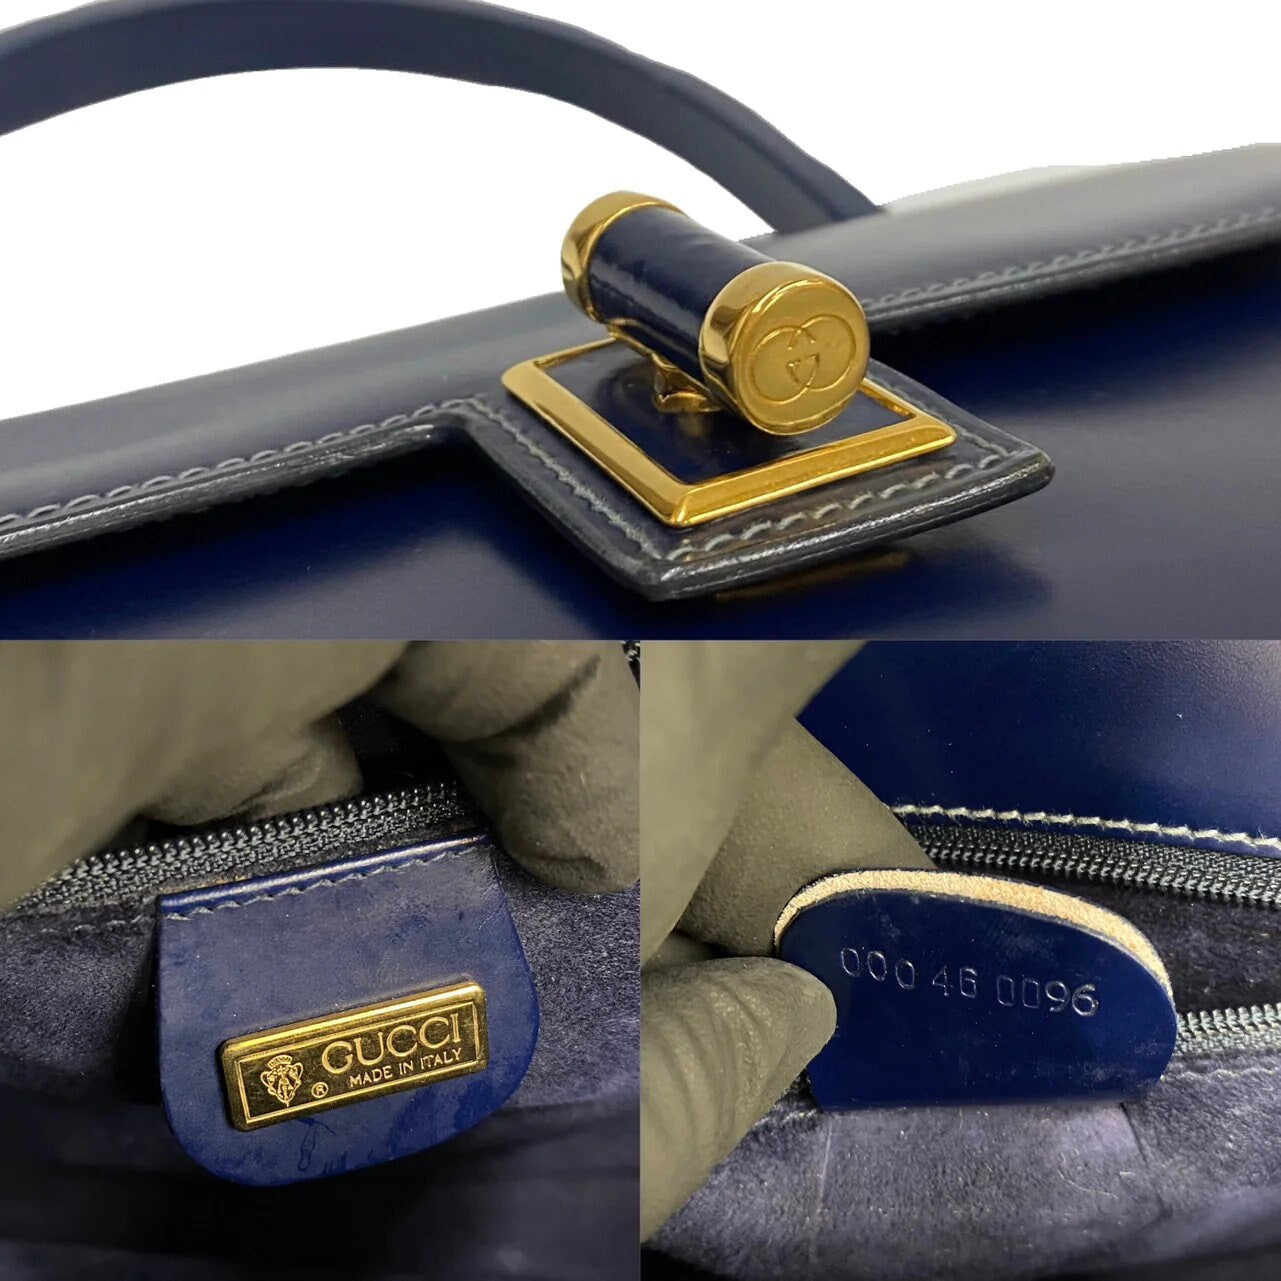 GUCCI VINTAGE 100% Authentic Genuine, Logo Embossed Top Handle Turn Lock Handbag, Dark Blue, Late 1980's - Early 1990's, Great Condition